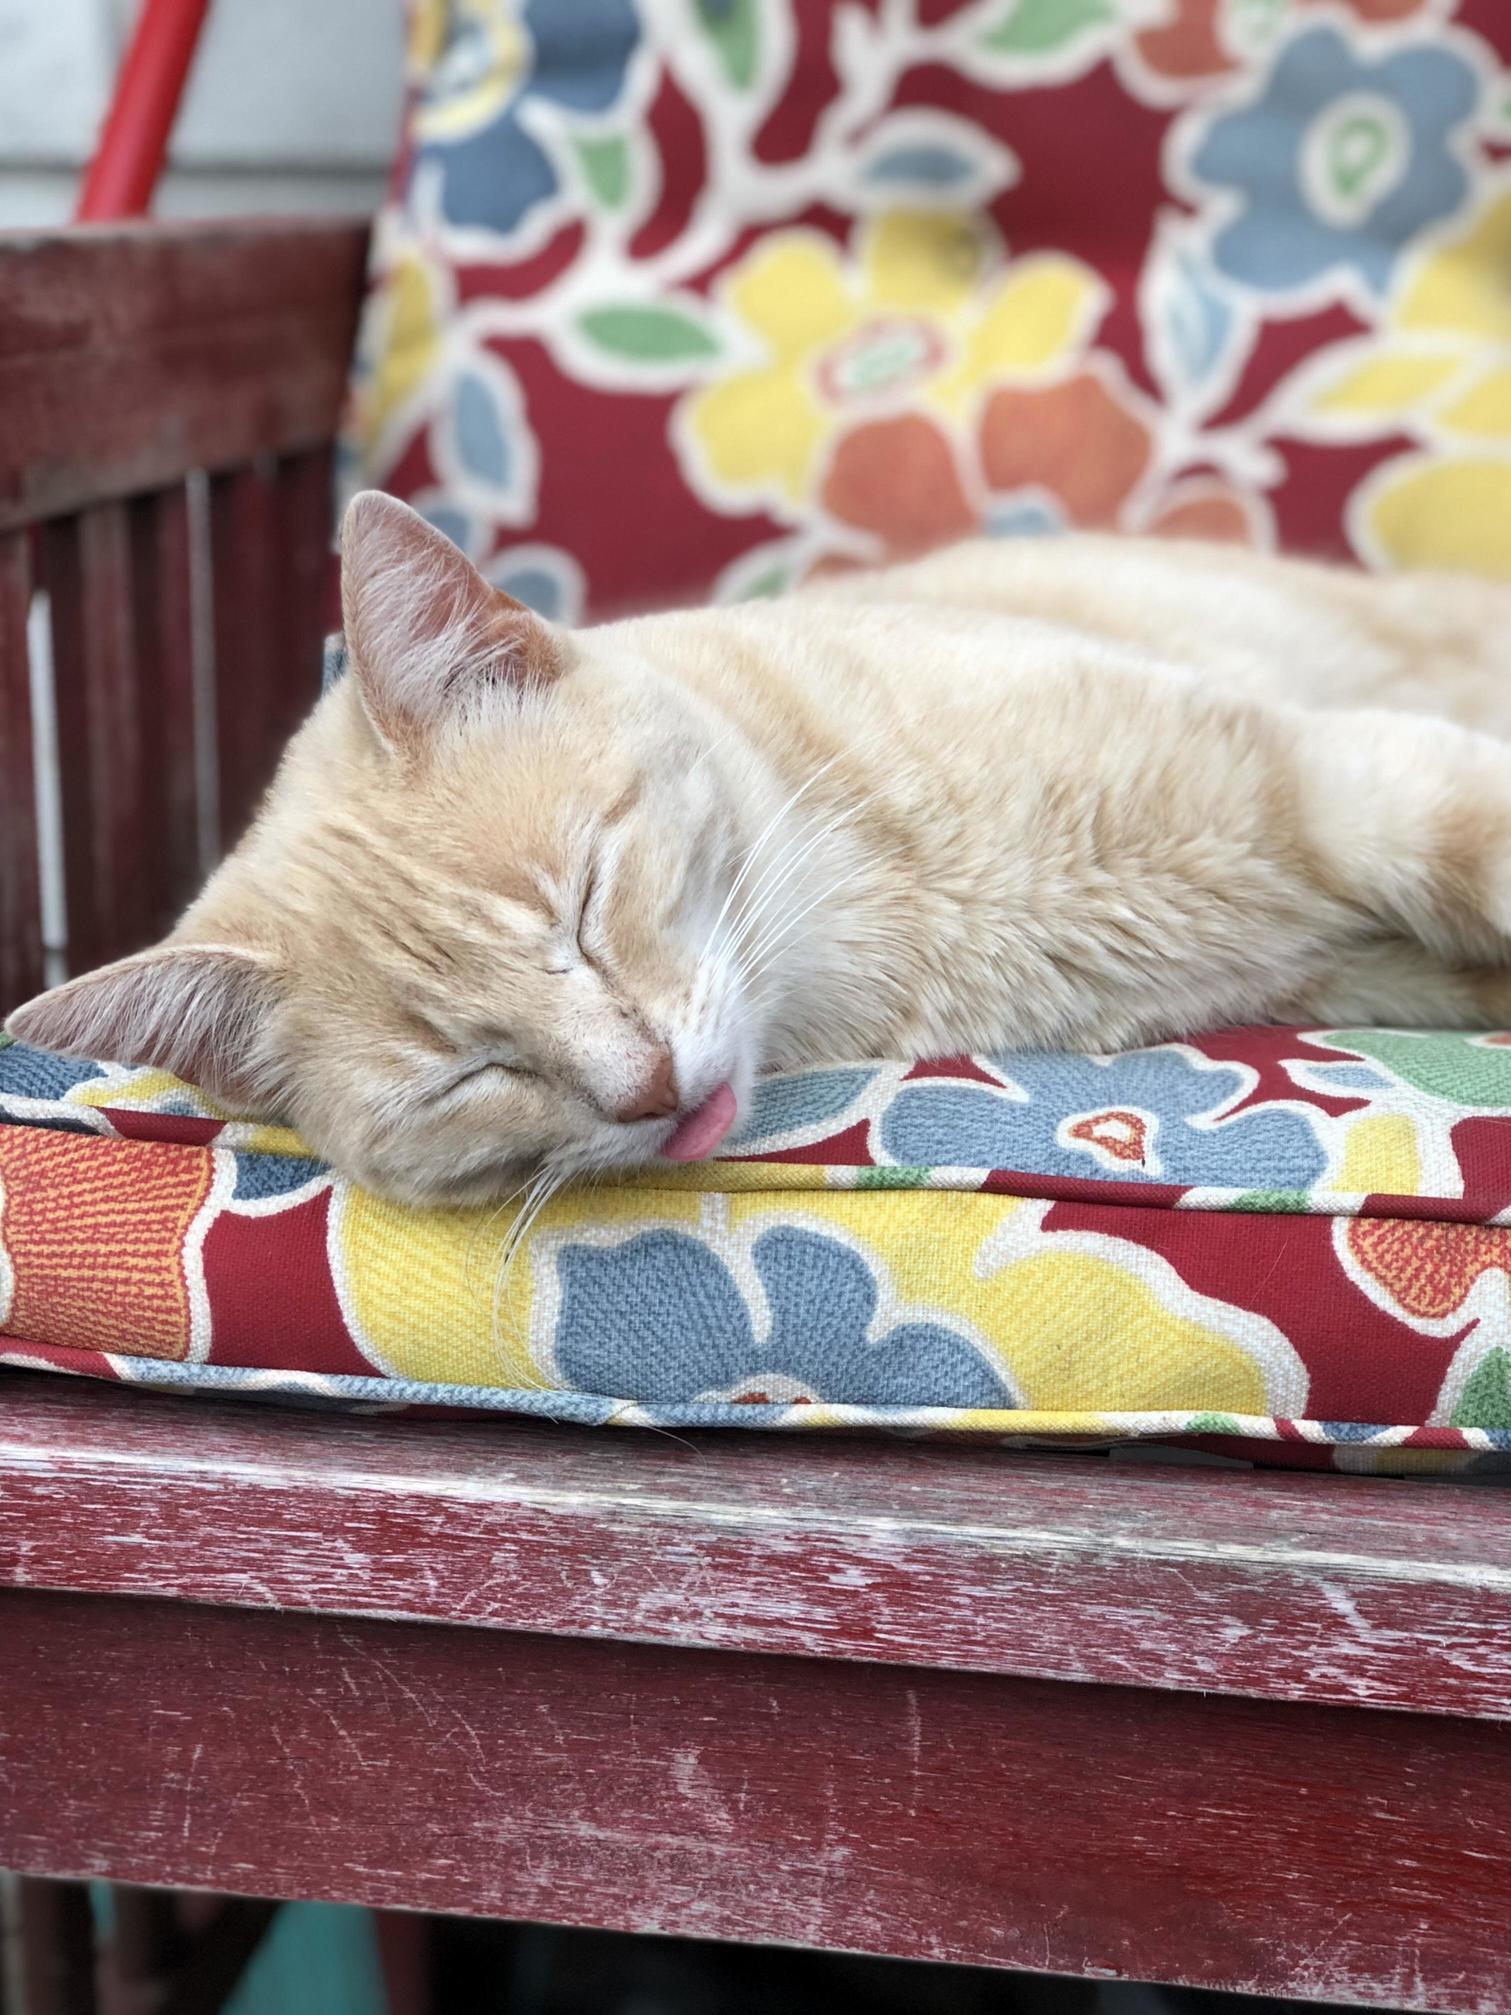 Caught the barn cat napping on the job